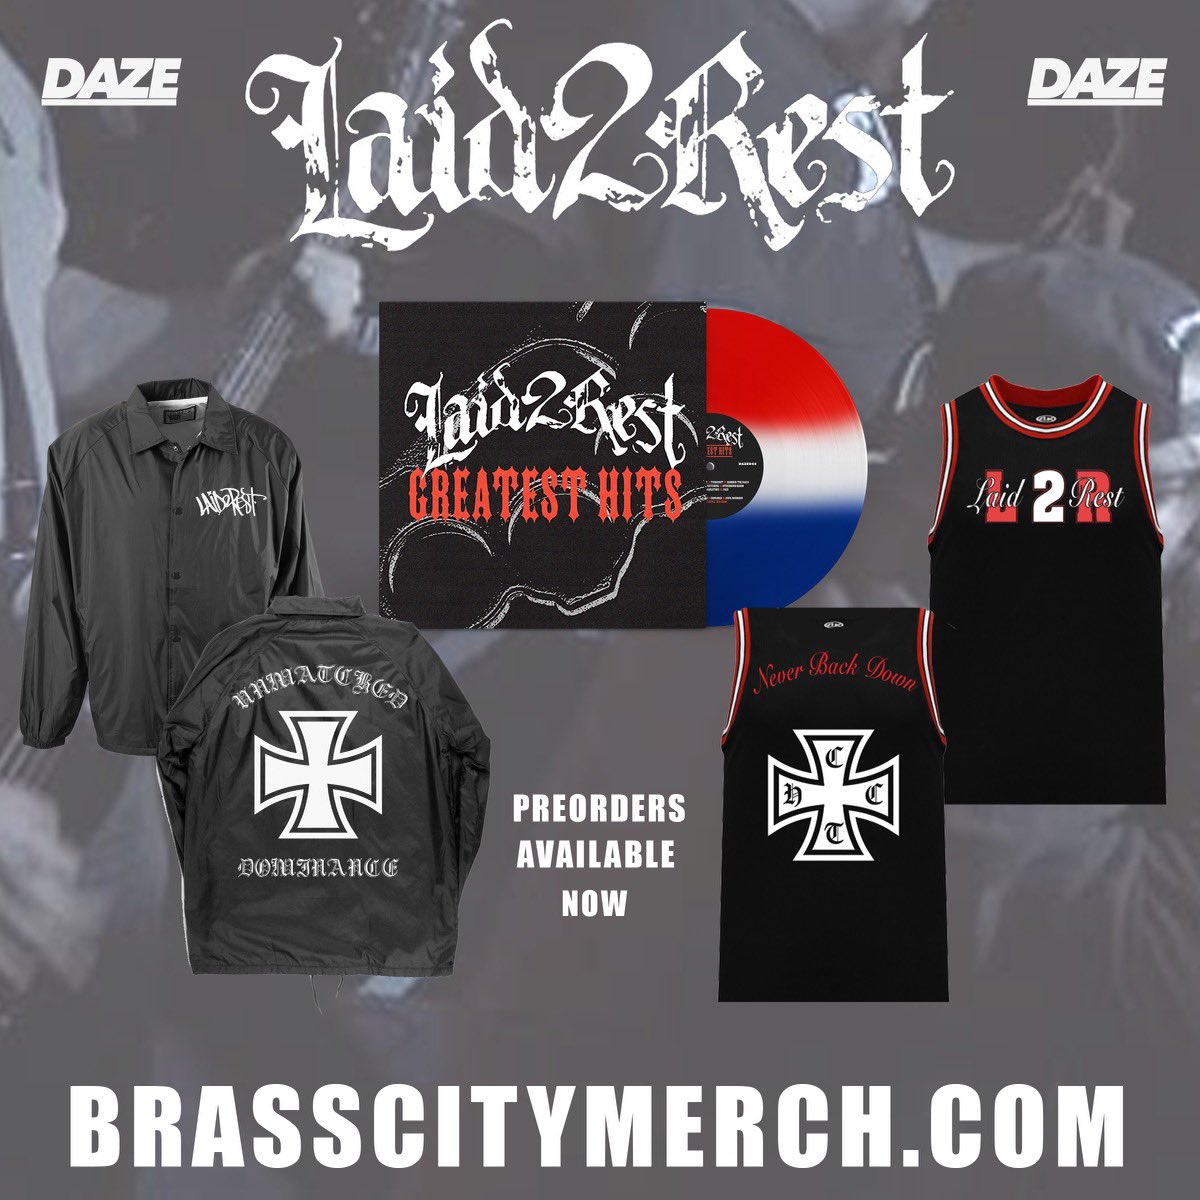 New limited variant of the Laid 2 Rest “Greatest Hits” LP as well as new L2R windbreakers and jerseys. #unmatcheddominance Purchase - brasscitymerch.com @DAZE_STYLE